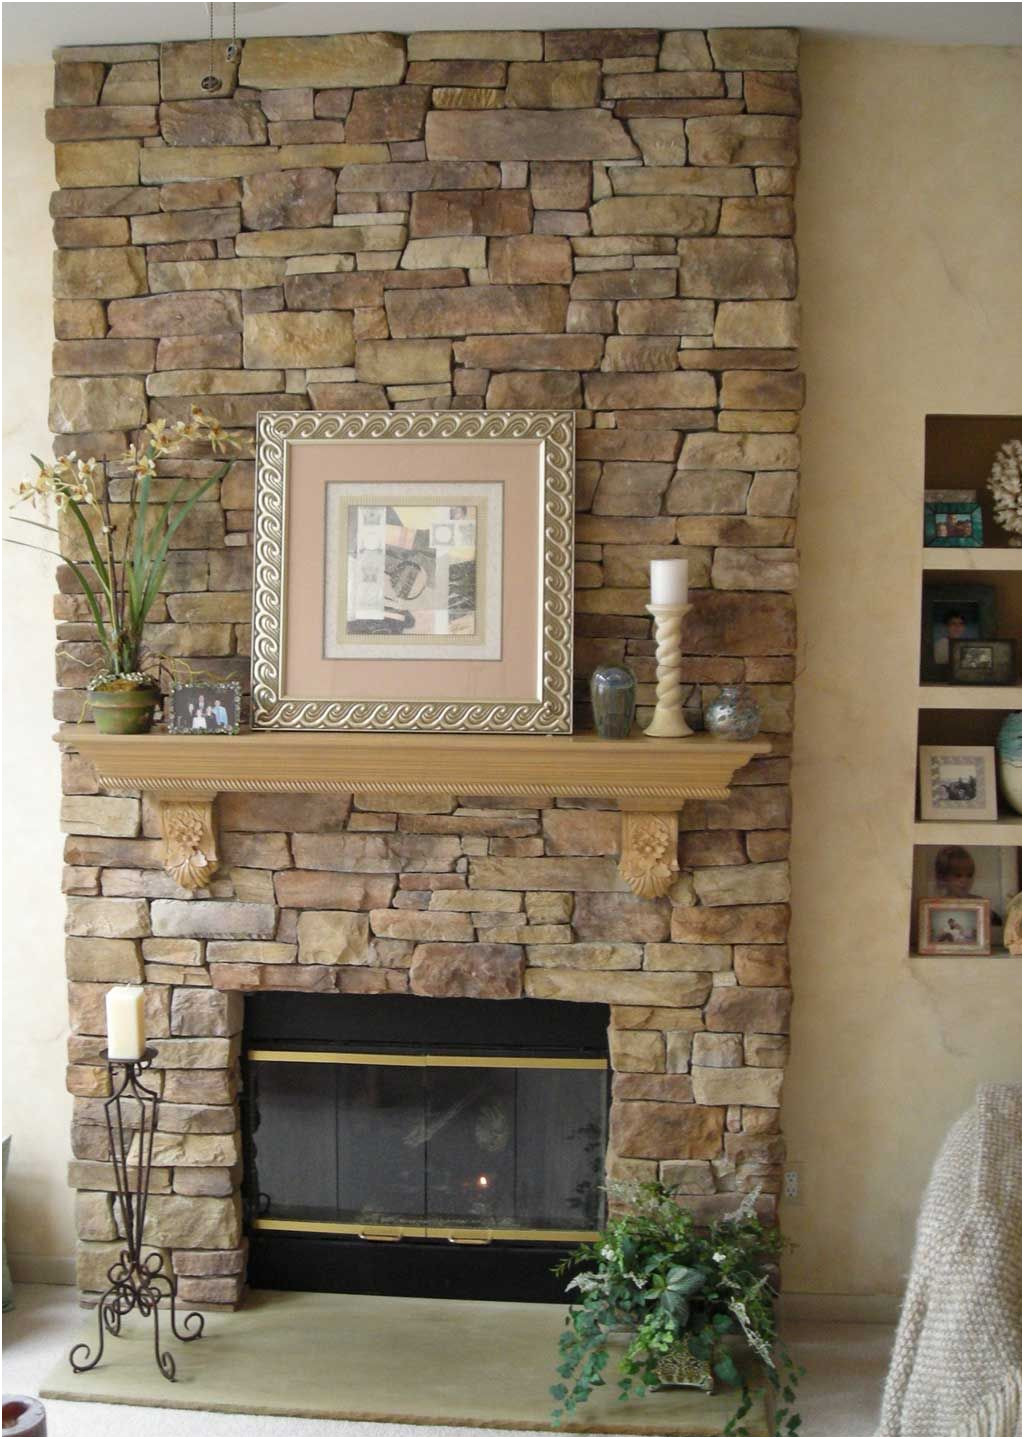 Fireplace Design with Stone Lovely Stone Veneer Fireplace Design Fireplace In 2019